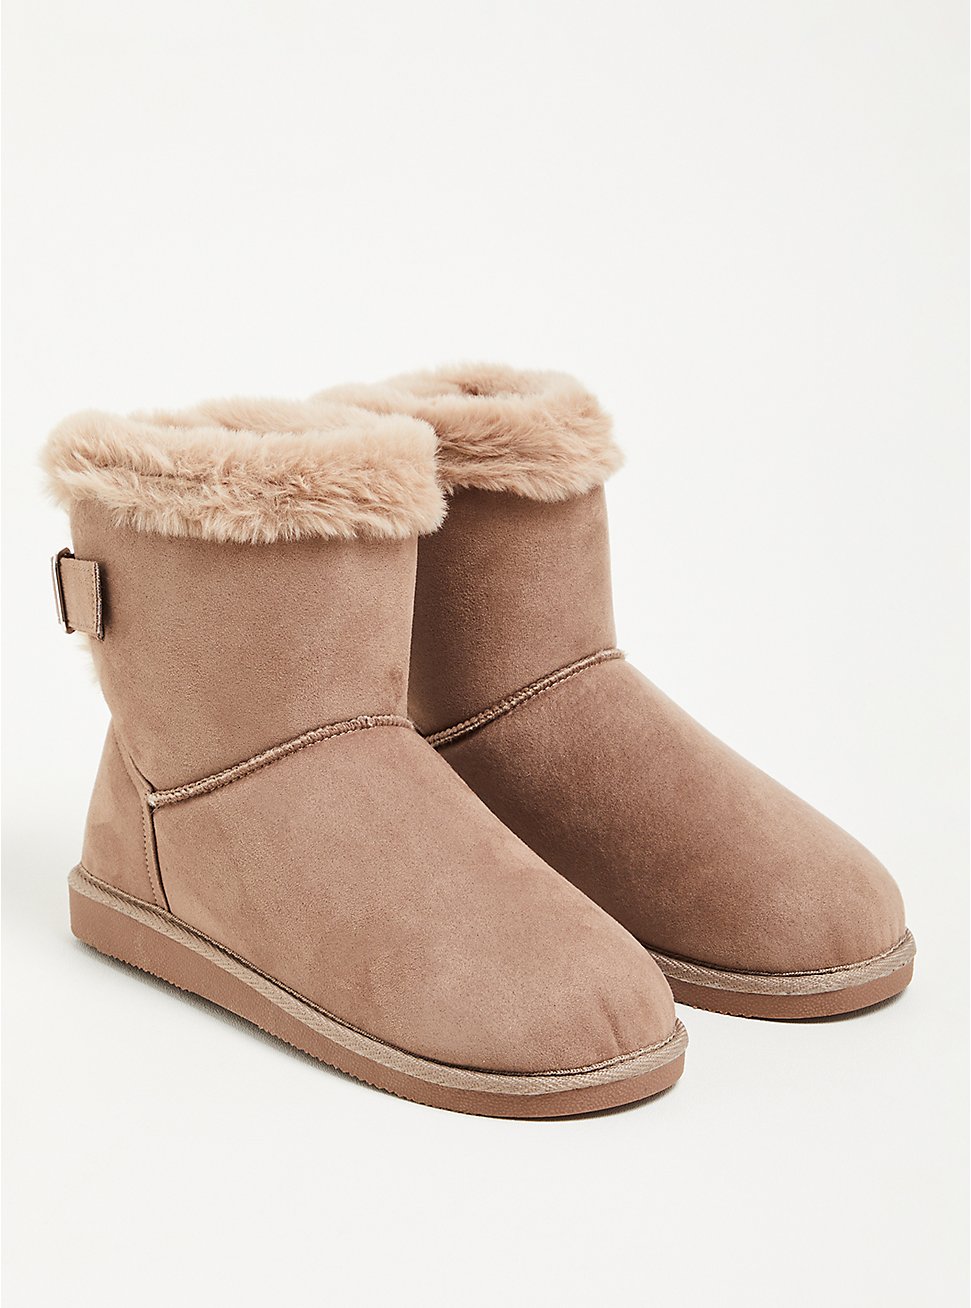 Fur-Lined Bootie (WW), TAUPE, hi-res